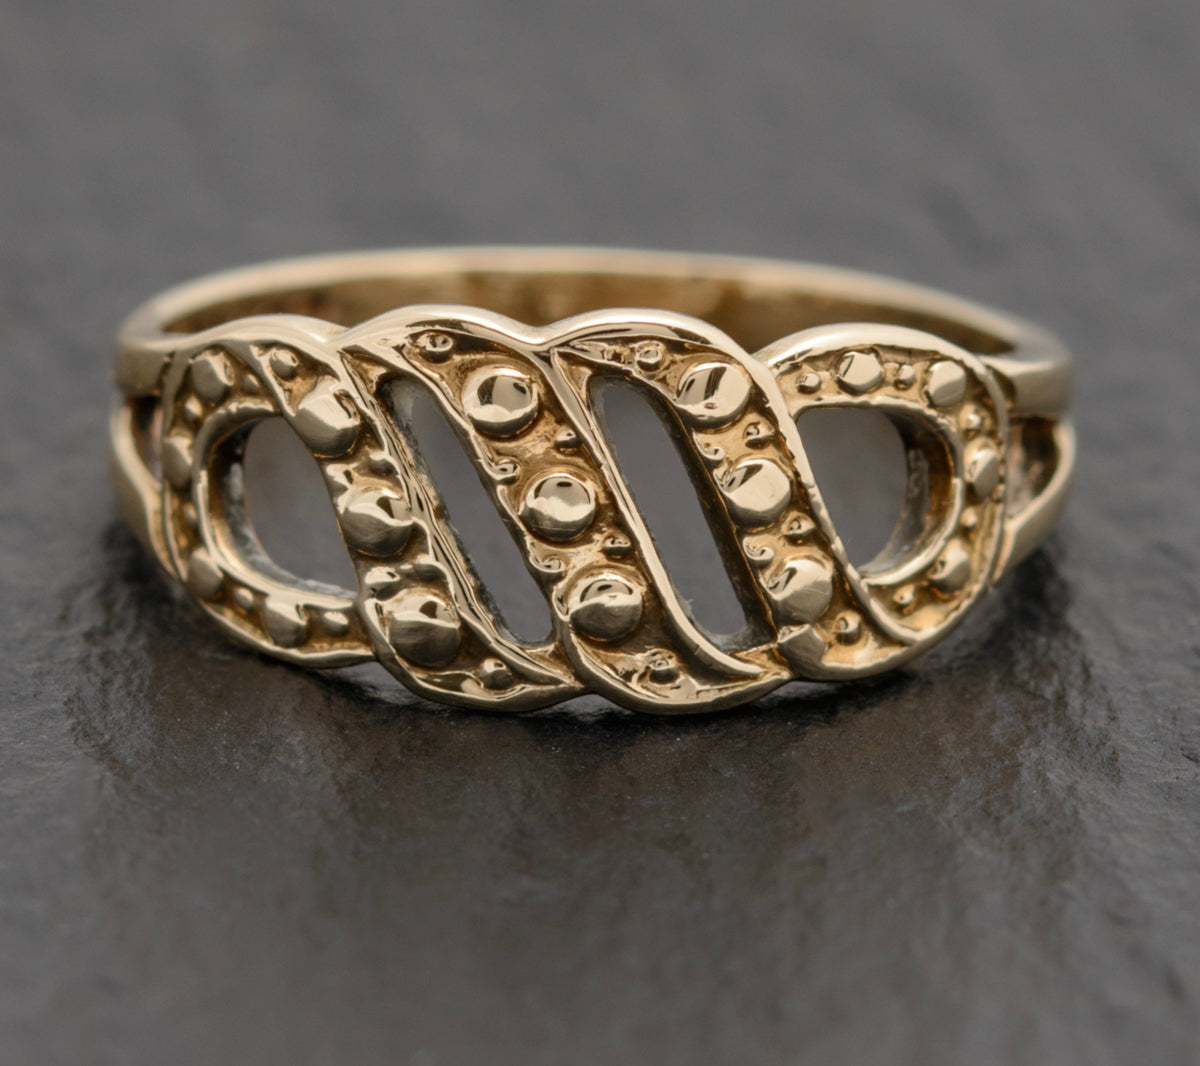 Vintage Solid 9ct Gold Ring With Open Work Endless Knot Size L London 1982 (A1749)